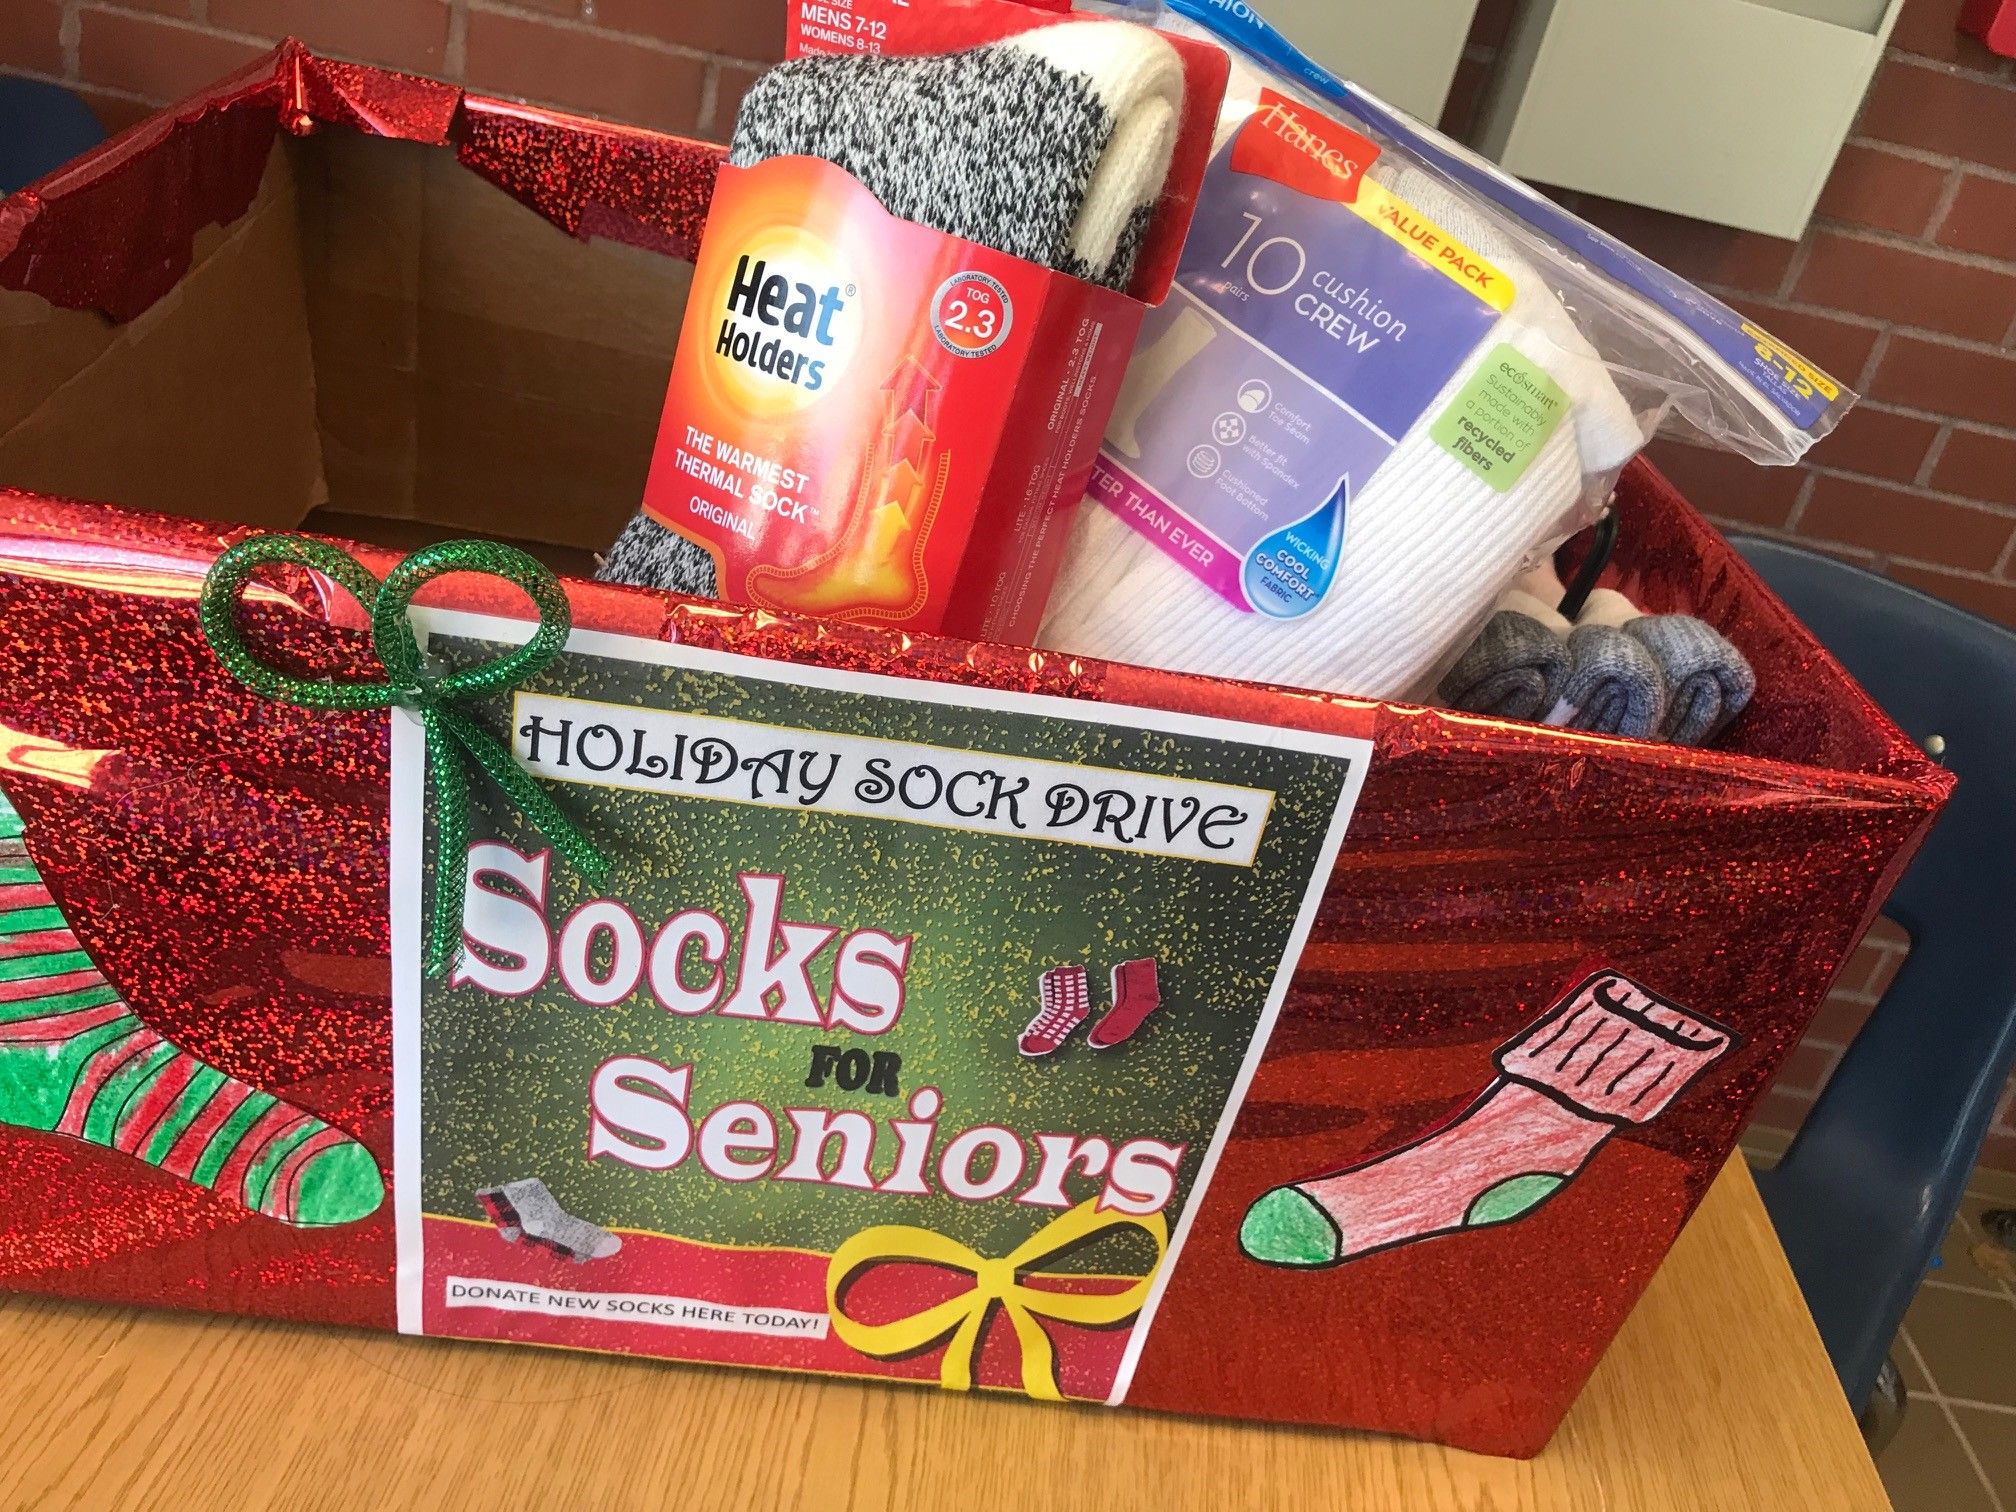 Socks For Seniors Idaho - We are thrilled to announce the return of  SEICAA's Socks for Seniors Stocking Drive! Adopted by SEICAA in 2017, this  year marks the 5th Anniversary of the